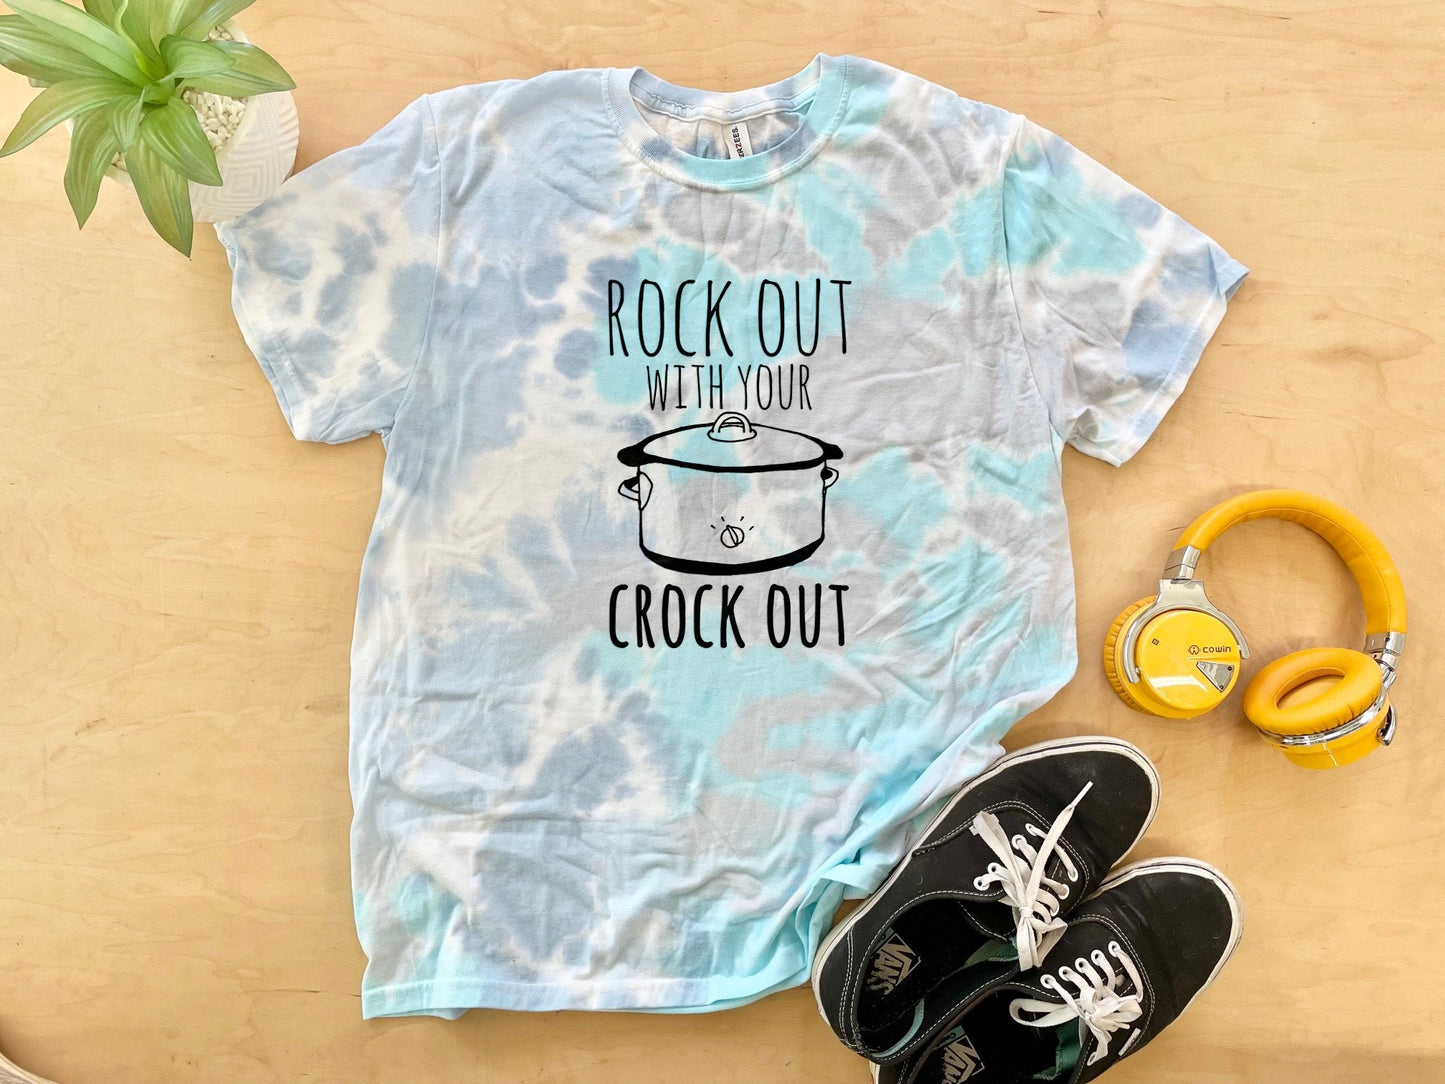 Rock Out With Your Crock Out - Mens/Unisex Tie Dye Tee - Blue